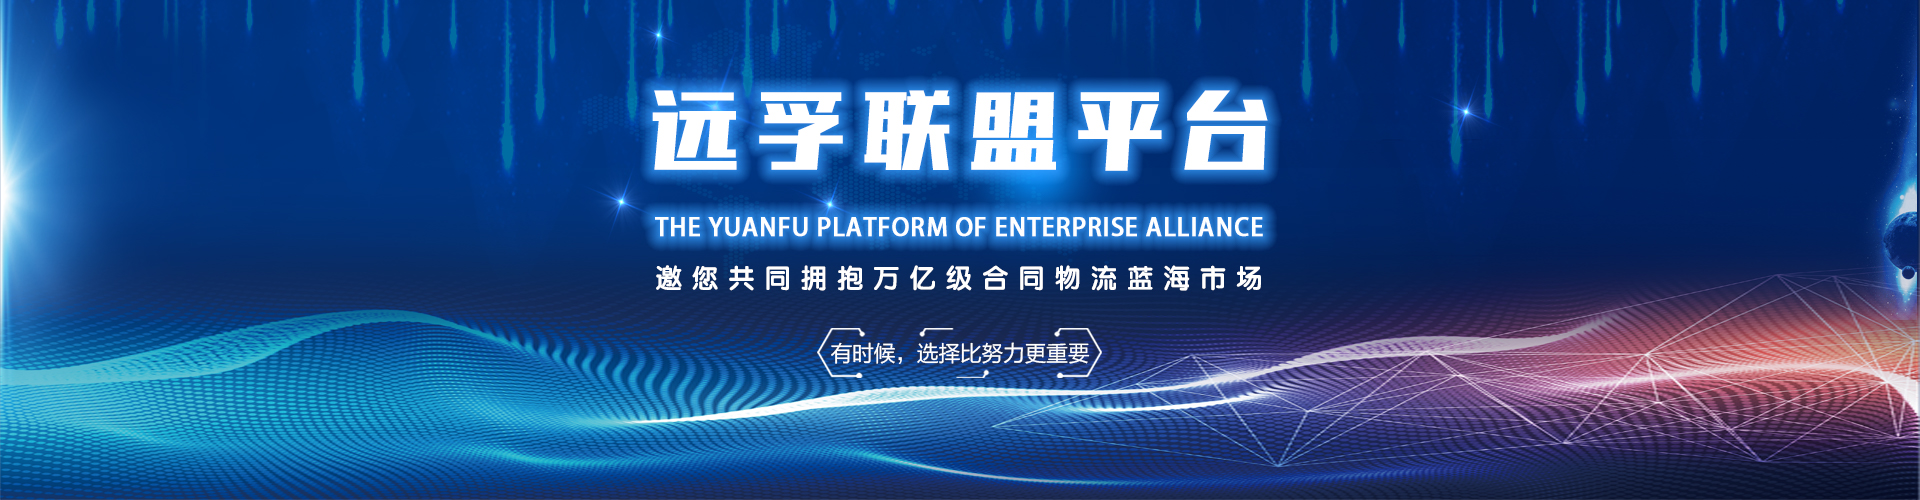 Fast Moving Consumption Goods_Yuanfu Logistics Group Co.,Ltd.—Serving our customer to focus on core business,win-win on the supply chain【official website】